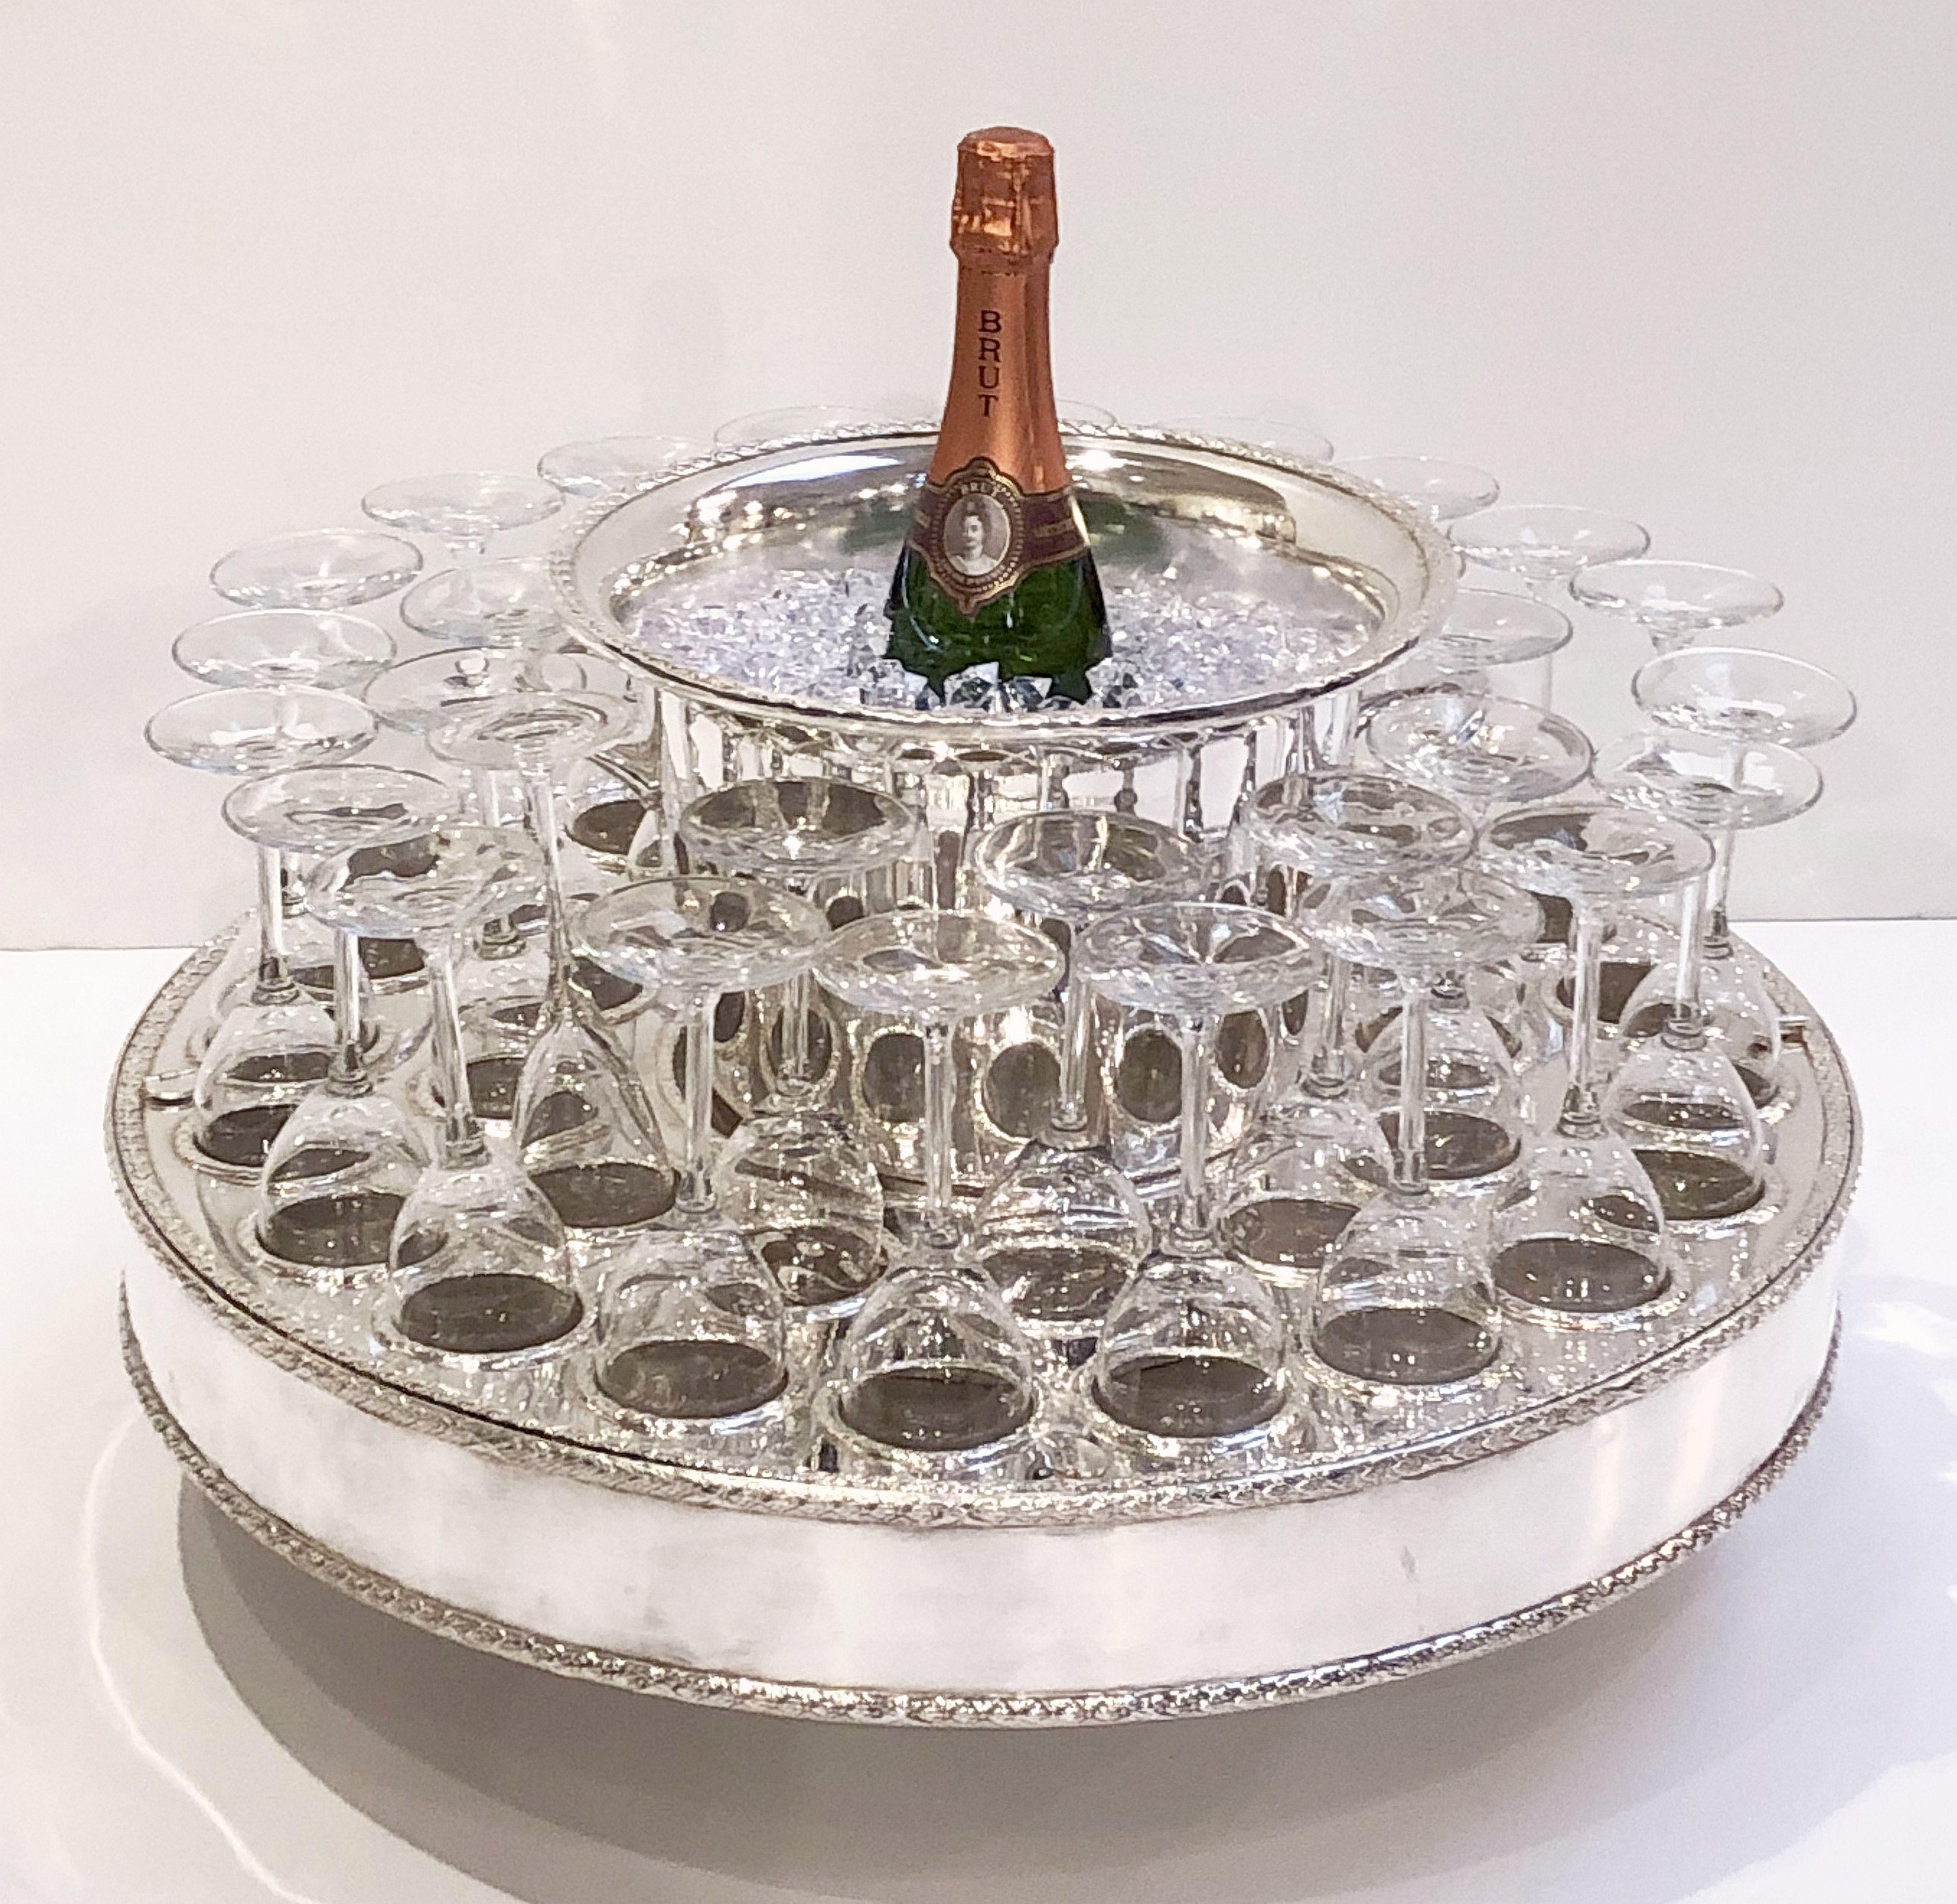 Italian Silver Champagne Service with Revolving Stand, Wine Cooler, and Glasses 2